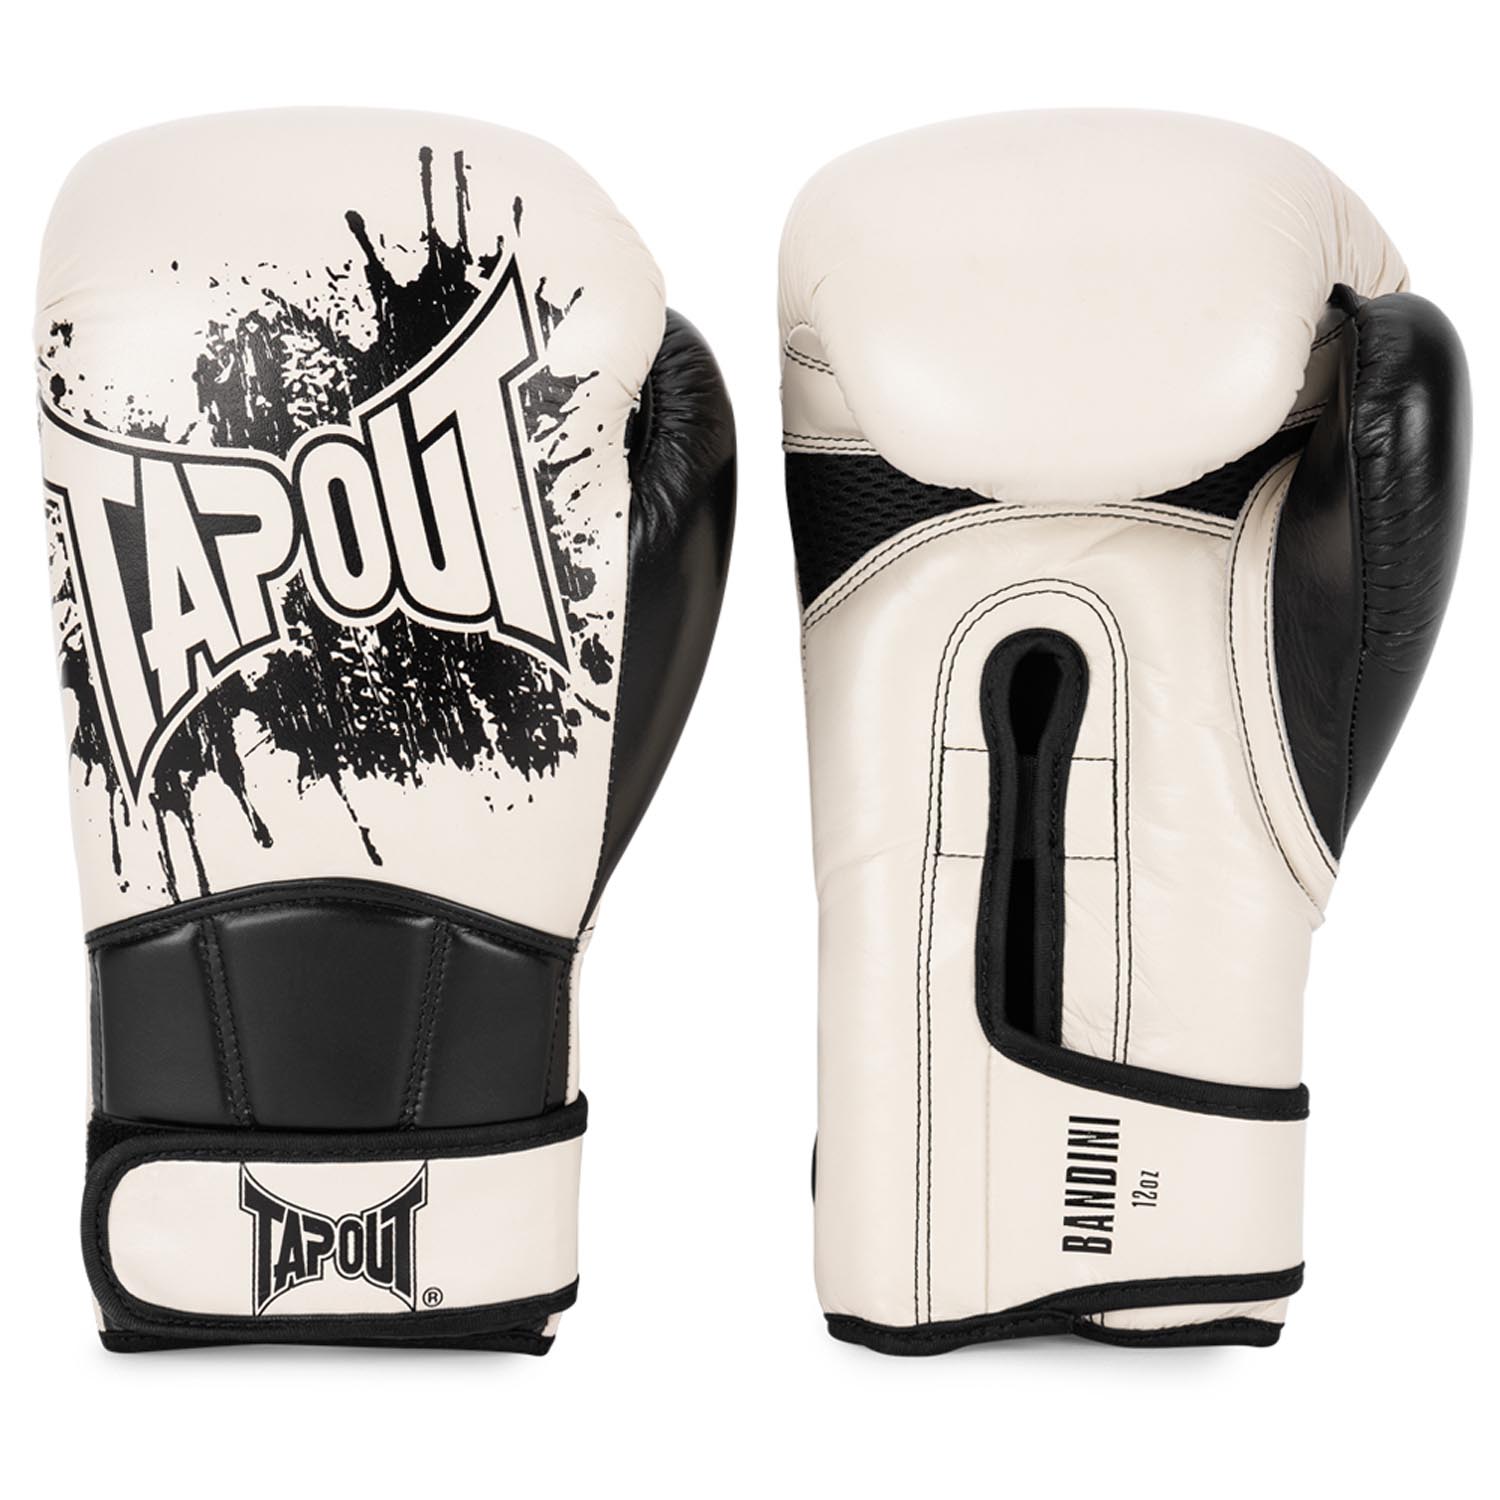 Tapout Boxing Gloves, Bandini, 14 Oz